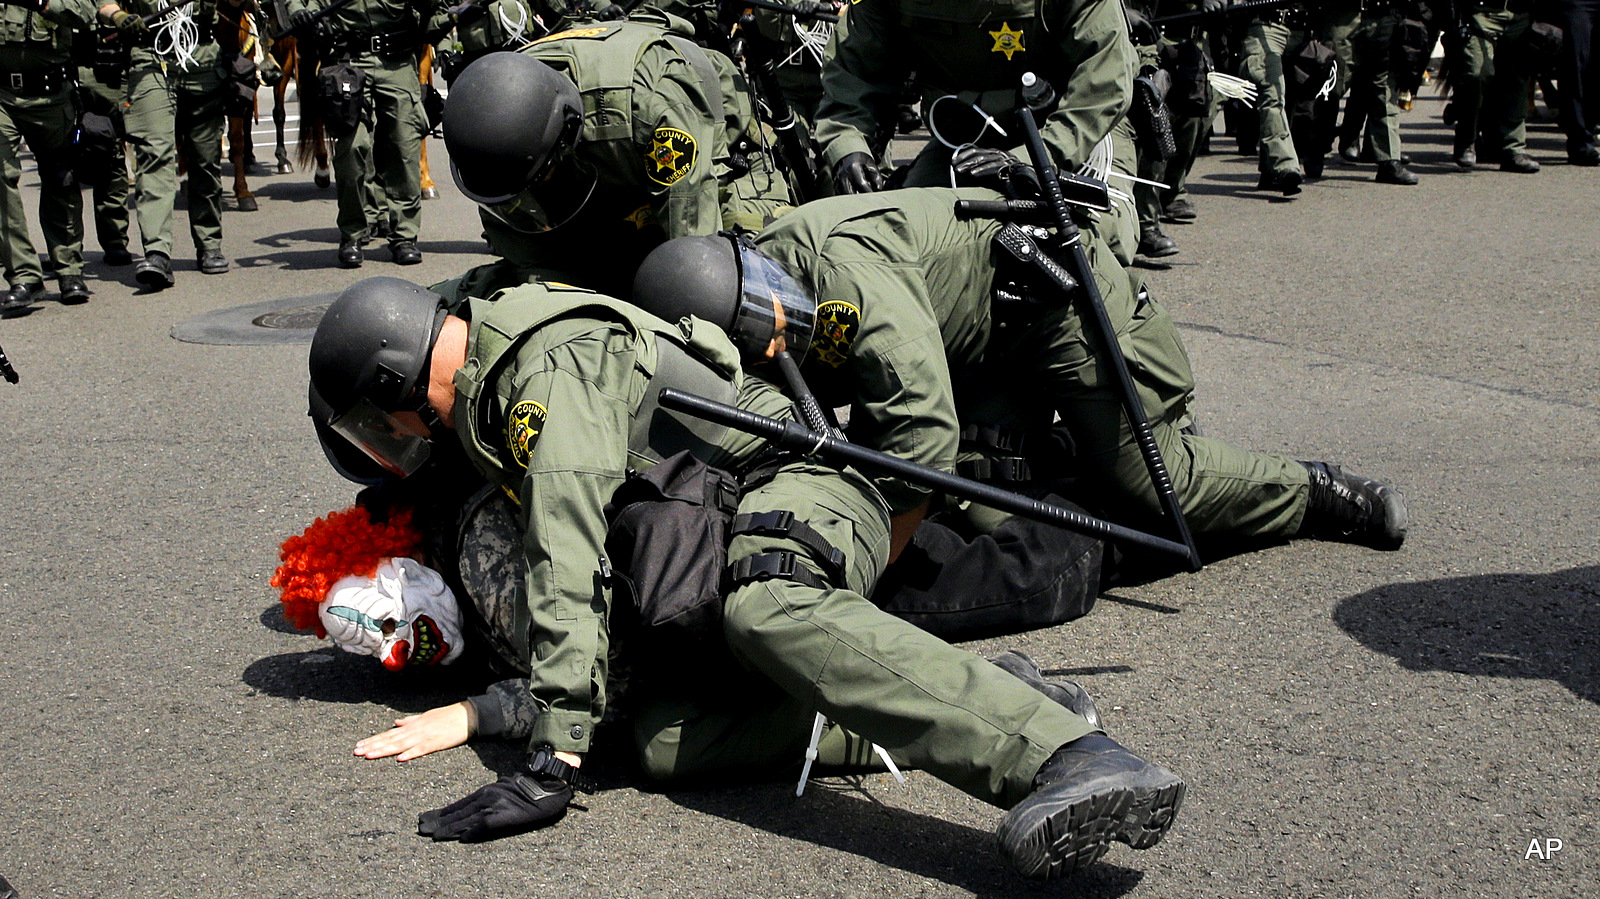 Orange County Sheriff's deputies take a protester into custody near the Anaheim Convention Center Wednesday, May 25, 2016, in Anaheim, Calif. Republican presidential candidate Donald Trump held a rally at the convention center.